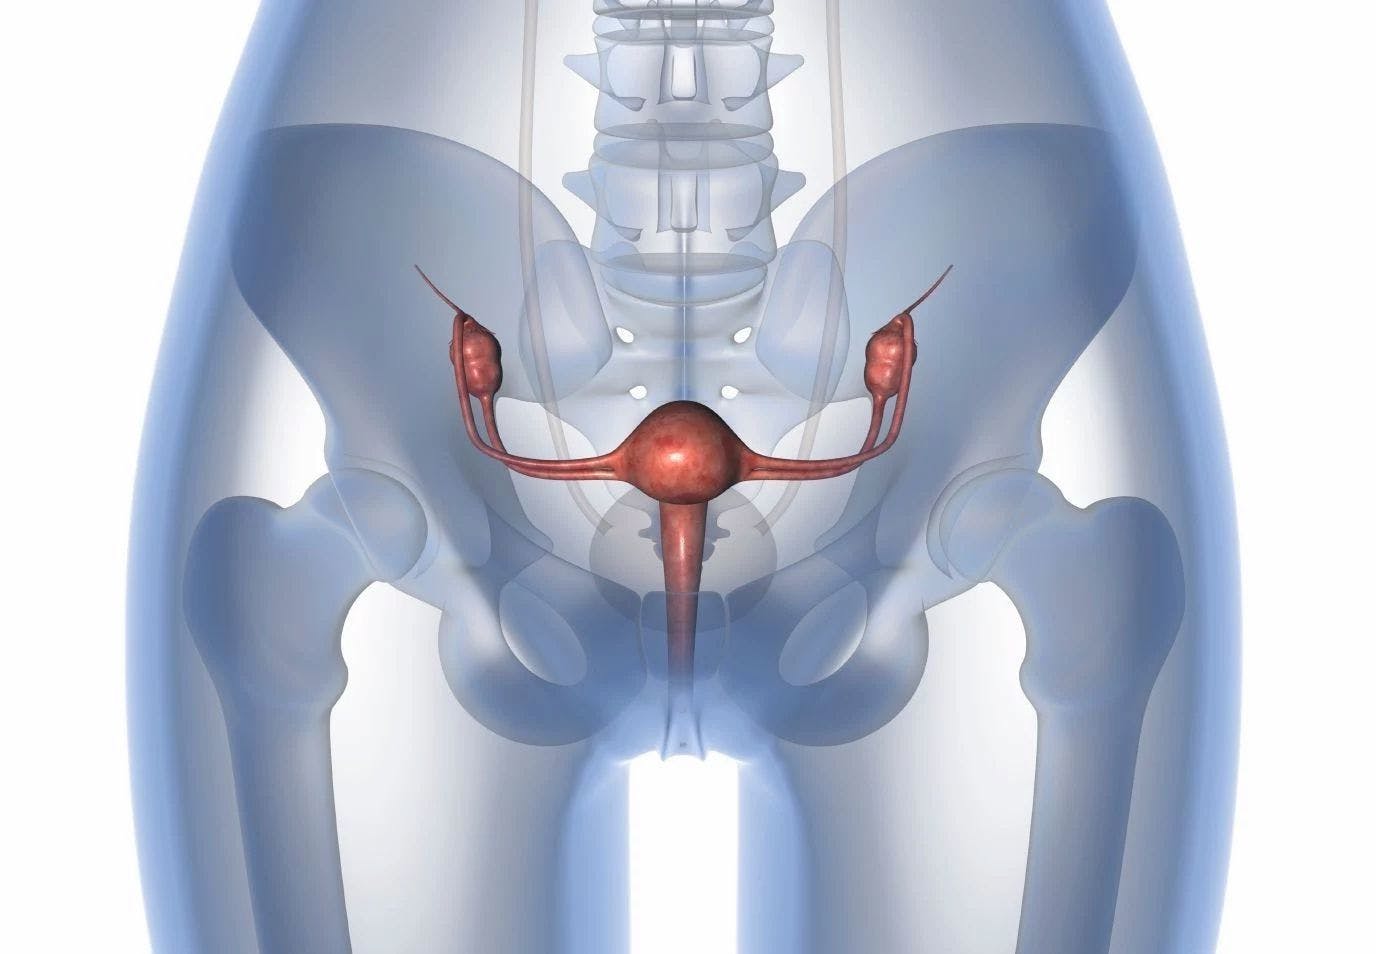 In a population of patients with recurrent mismatch repair proficient endometrial cancer, treatment with avelumab and talazoparib appeared to be well tolerated.